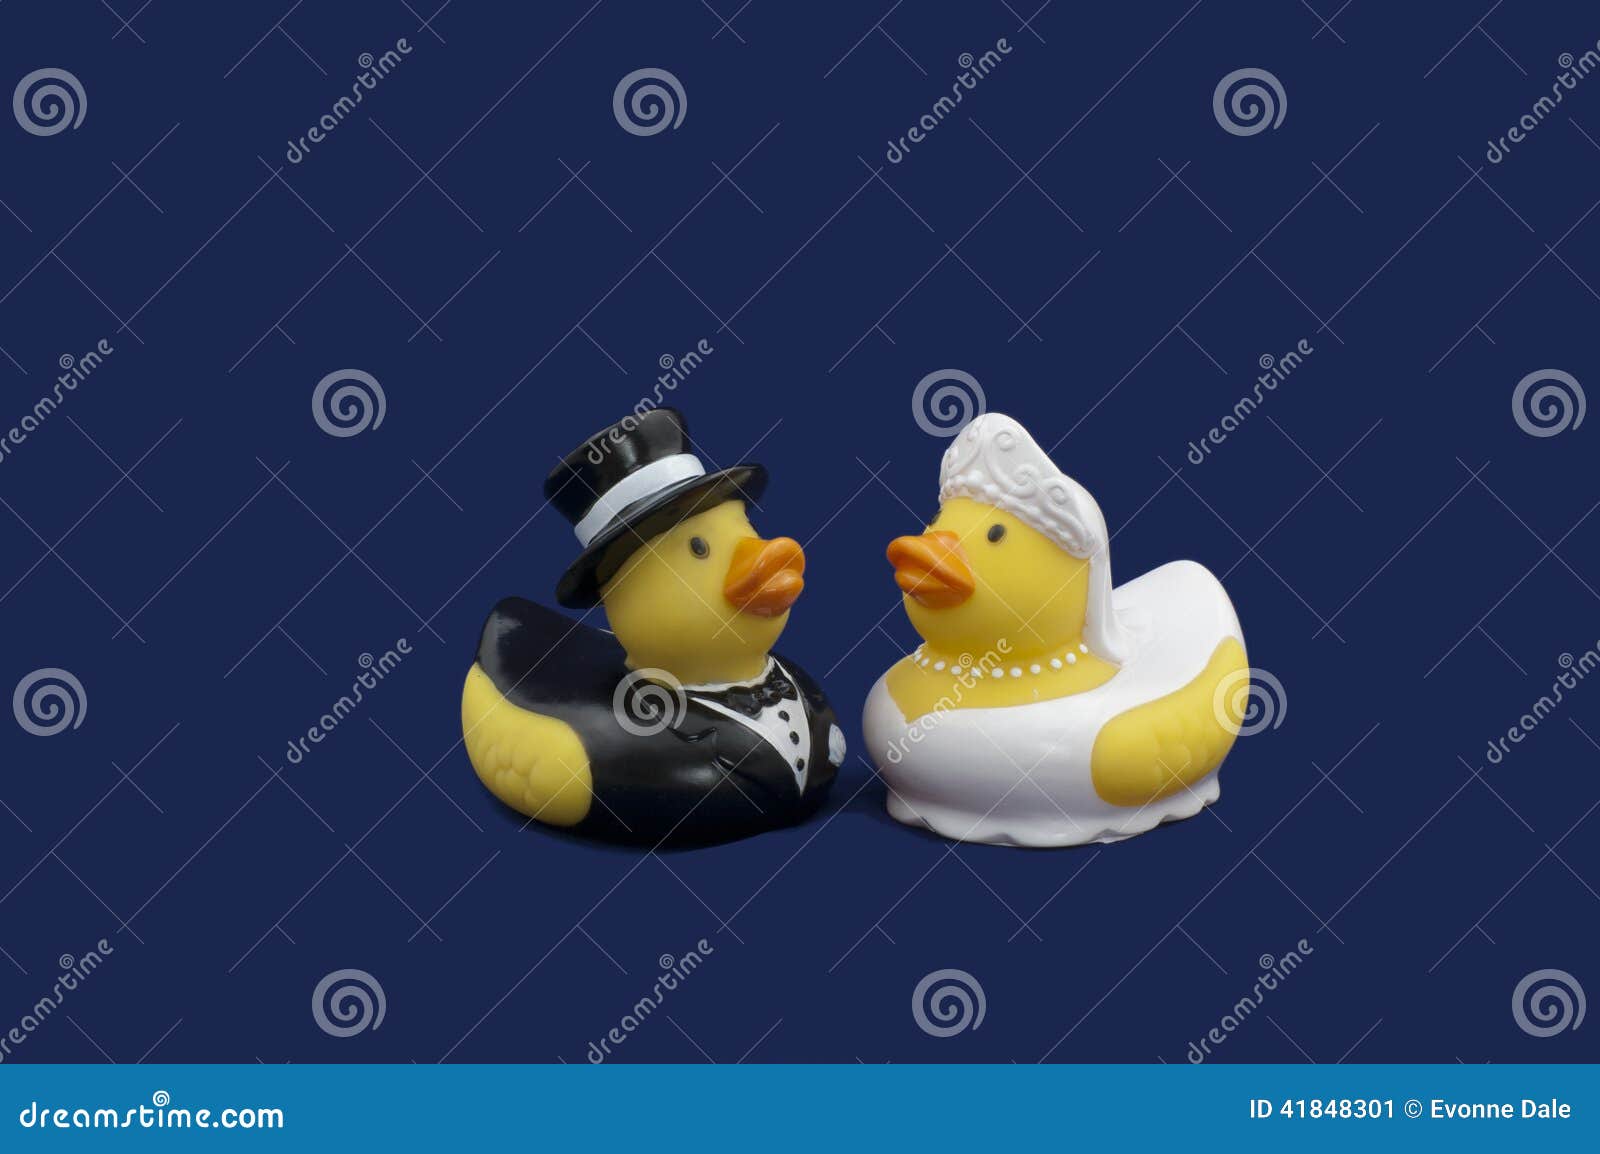 Rubber Ducks Bride And Groom Stock Image Image Of Blue Cute